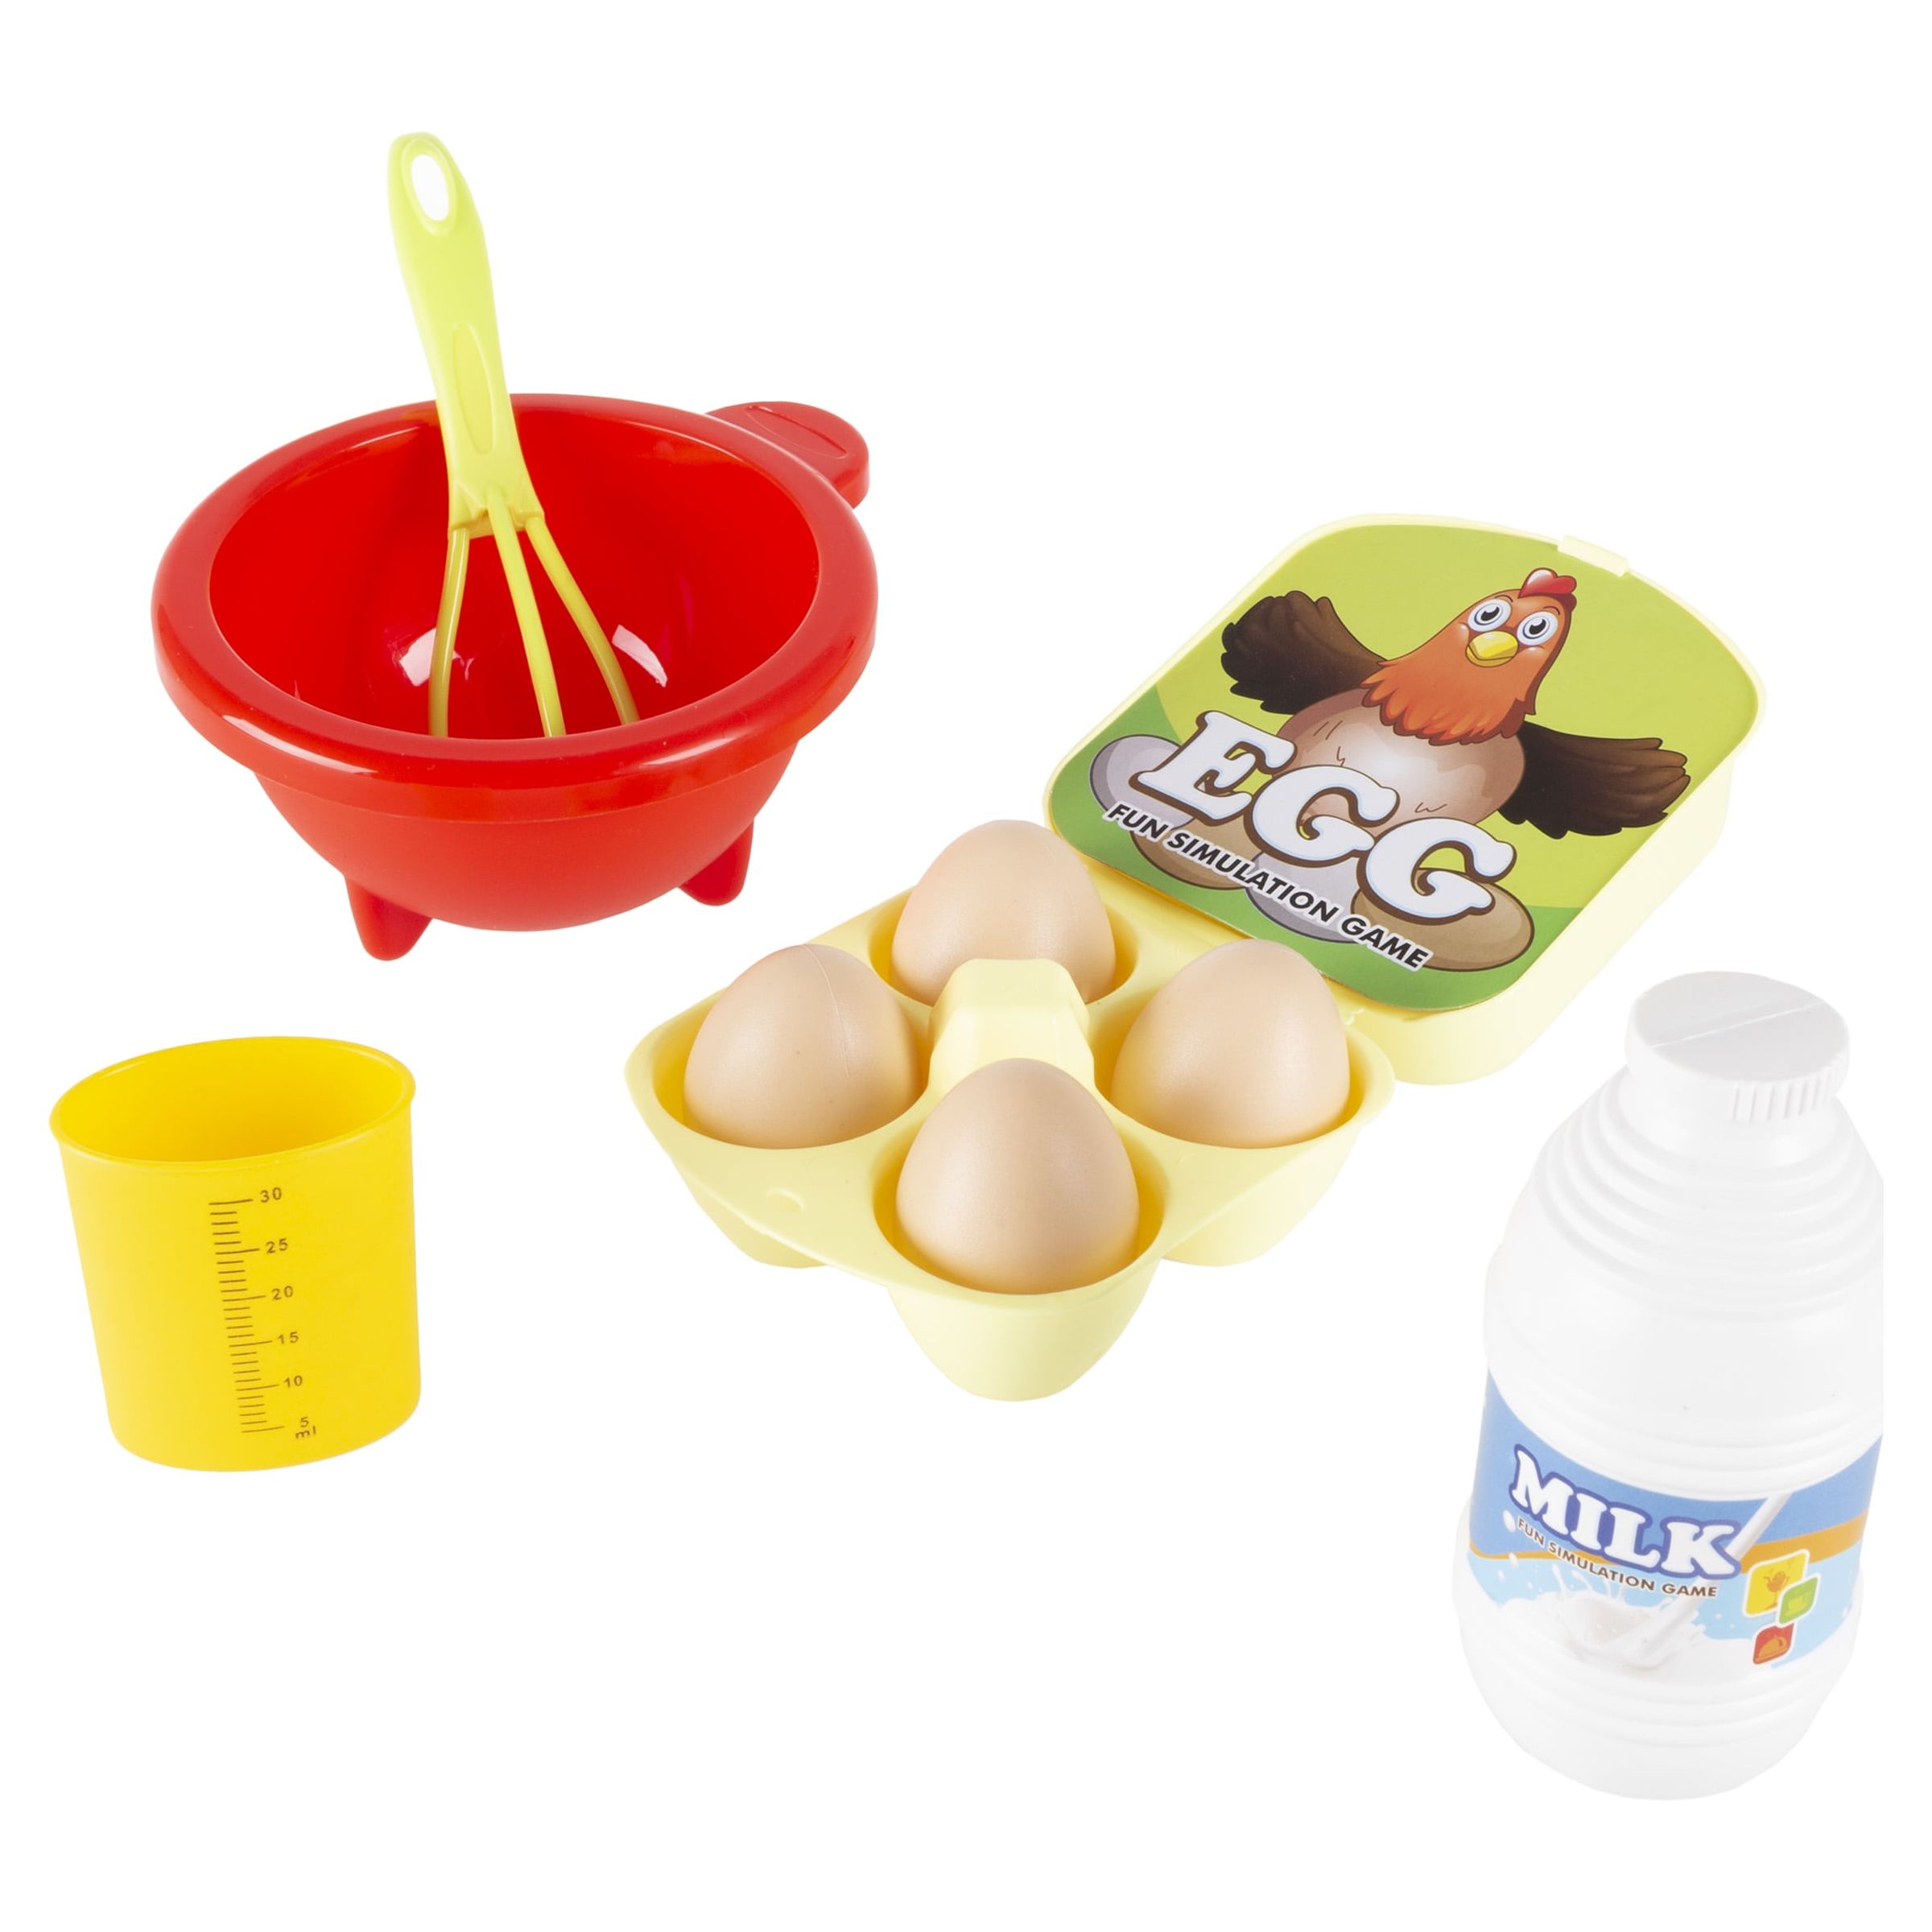 Kids Toy Waffle Iron Set with Music and Lights - Fun Pretend Play Waffle Making Kit by Hey! Play! - image 4 of 7